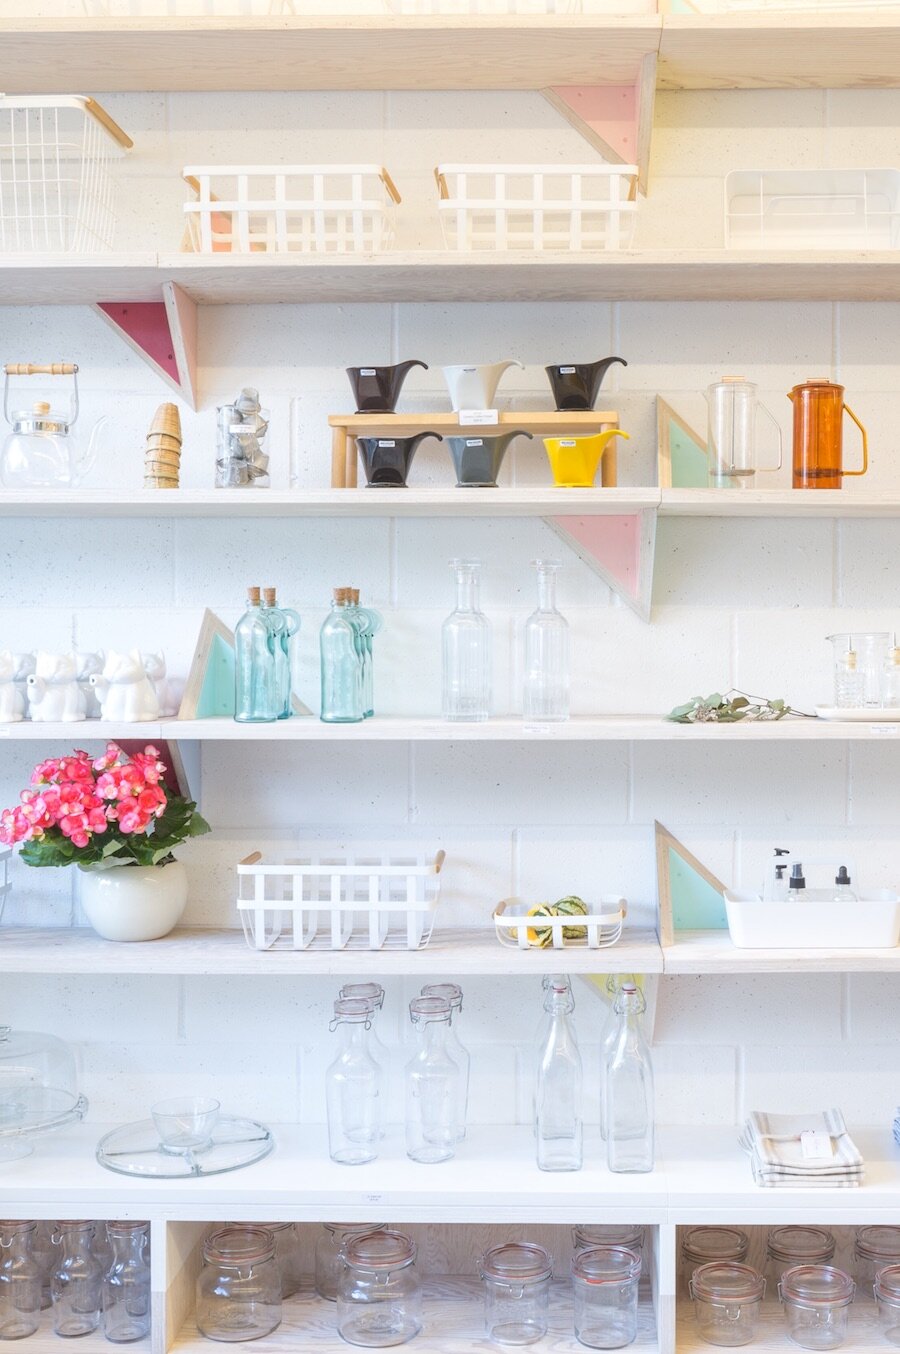 Instagrammer's Guide To Vancouver - Soap Dispensary - 91 Magazine